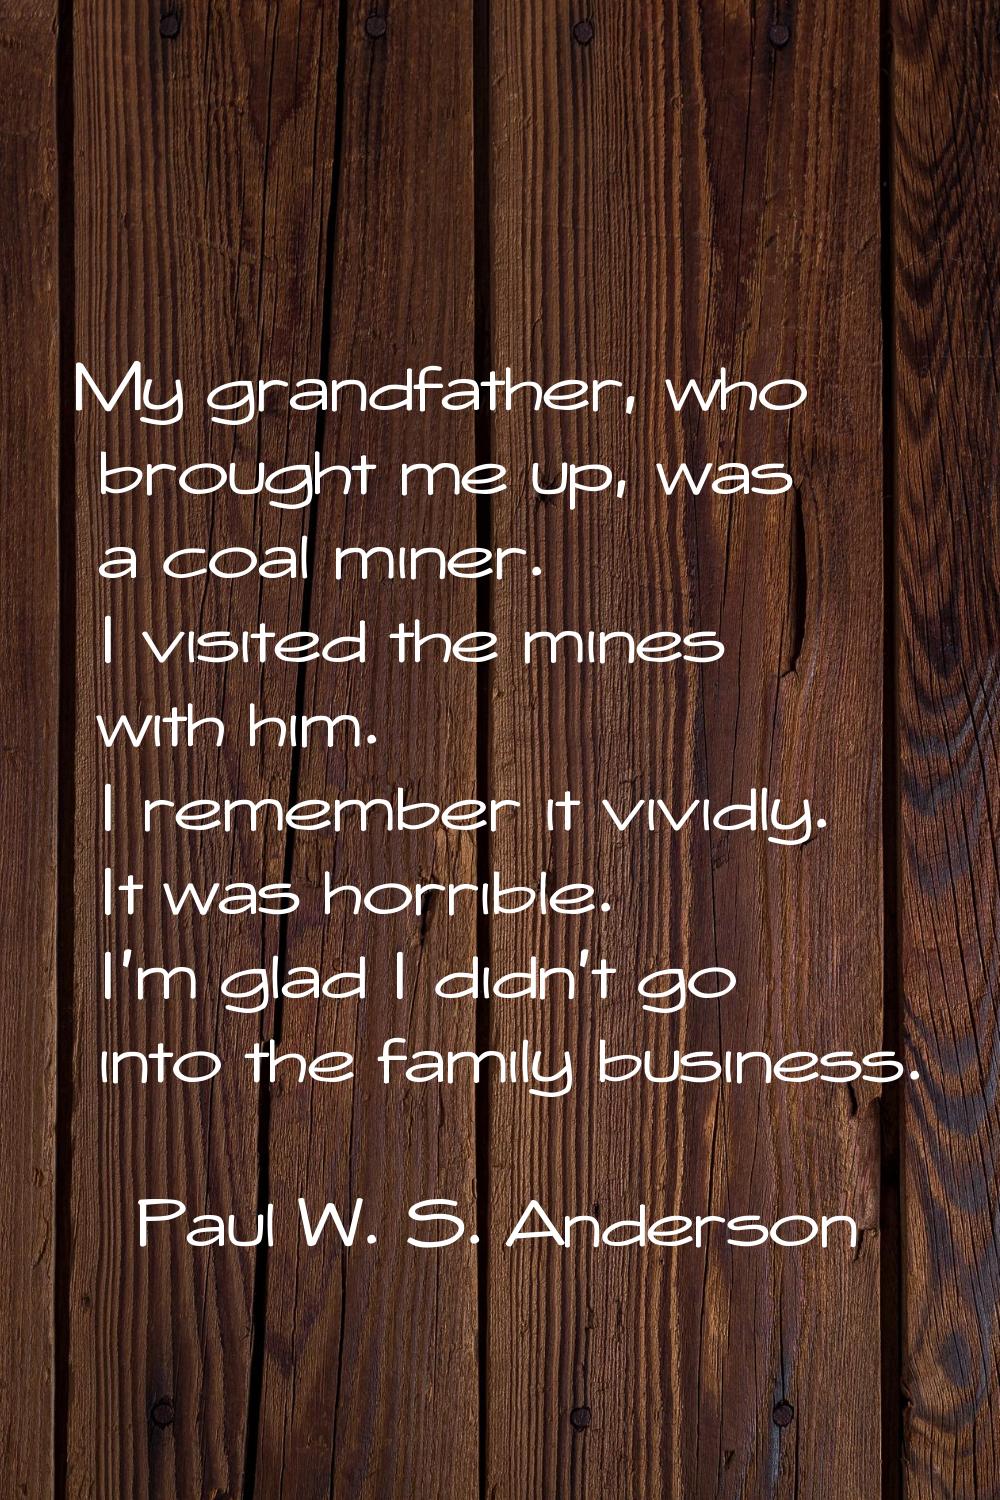 My grandfather, who brought me up, was a coal miner. I visited the mines with him. I remember it vi